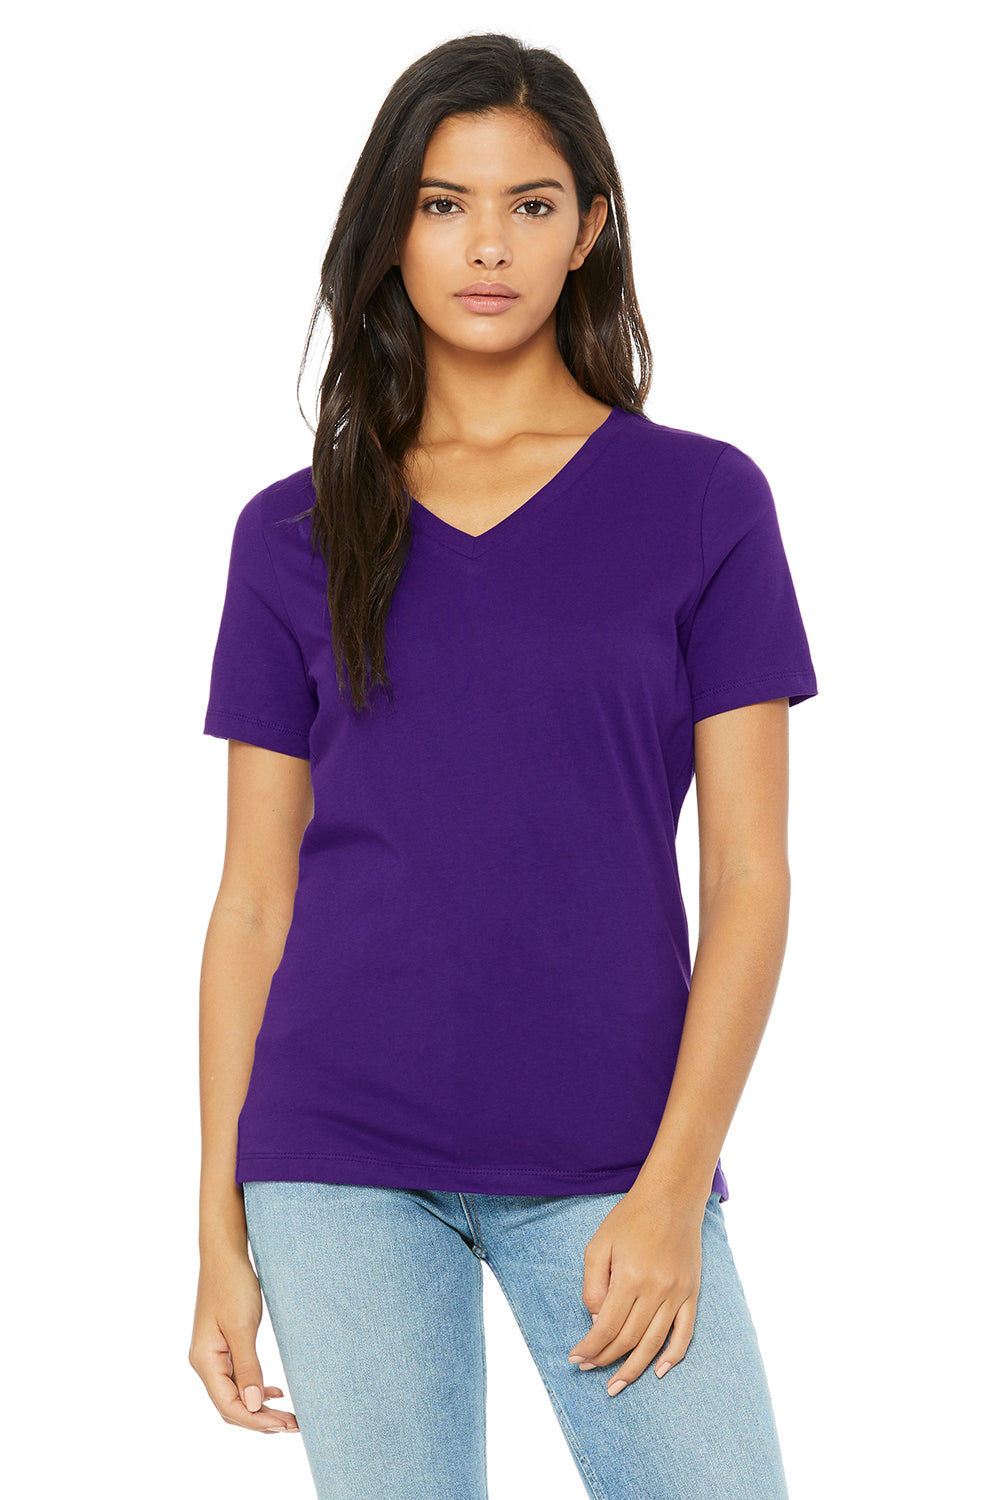 Bella + Canvas BC6405/6405 Womens Relaxed Jersey Short Sleeve V-Neck T-Shirt Team Purple Model Front